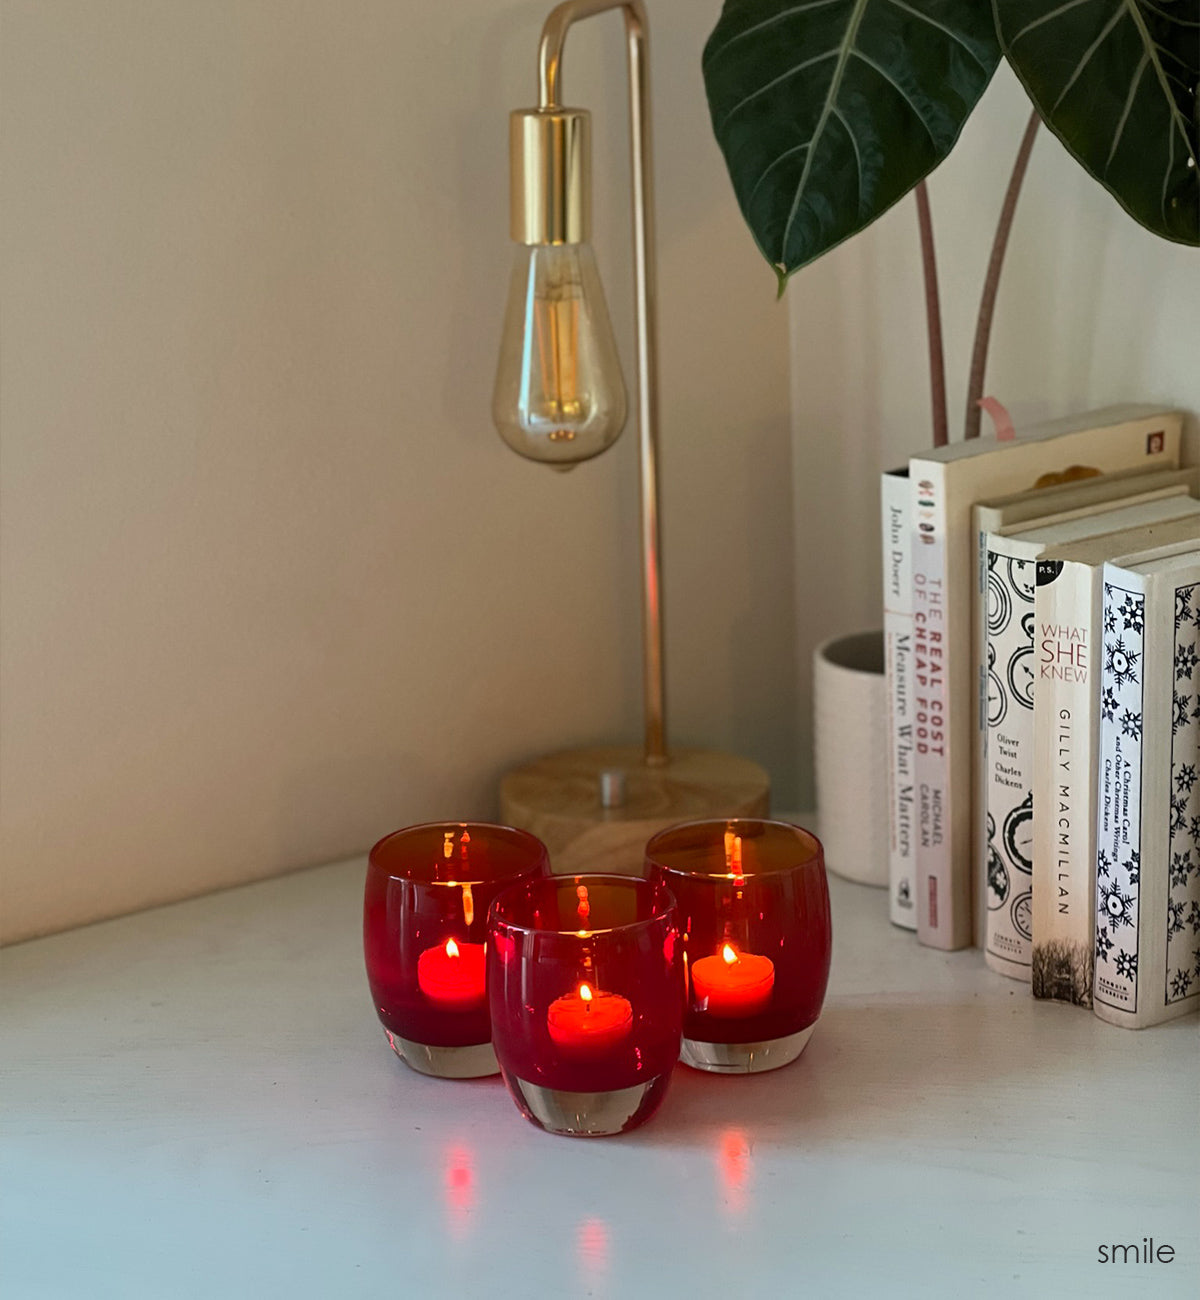 three smile, translucent bold red hand-blown glass votive candle holders with lit tealights on a desk with a lamp, plant and books.